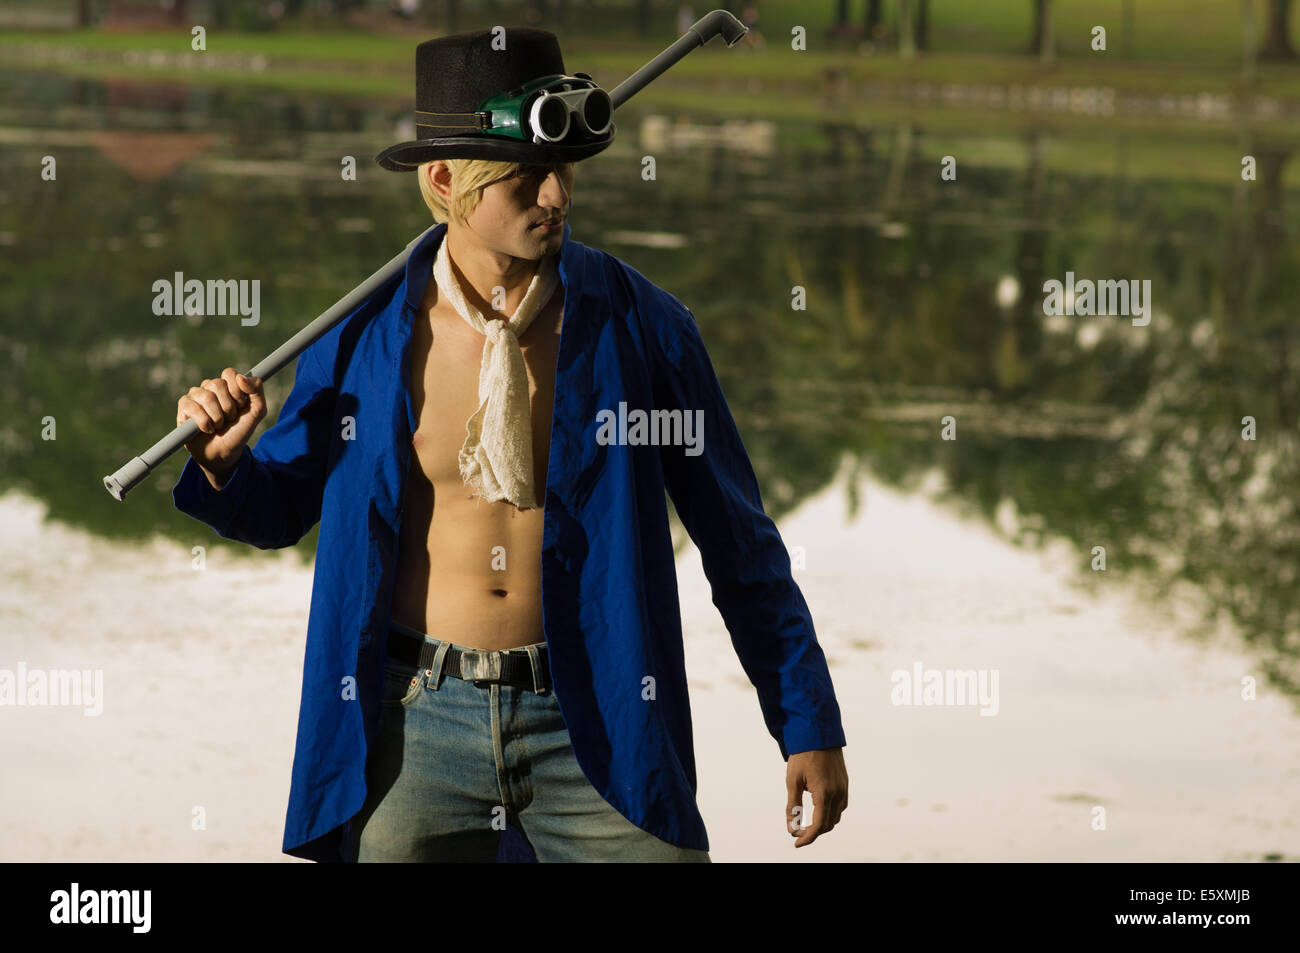 a cosplayer cosplaying as sabo from one piece Stock Photo